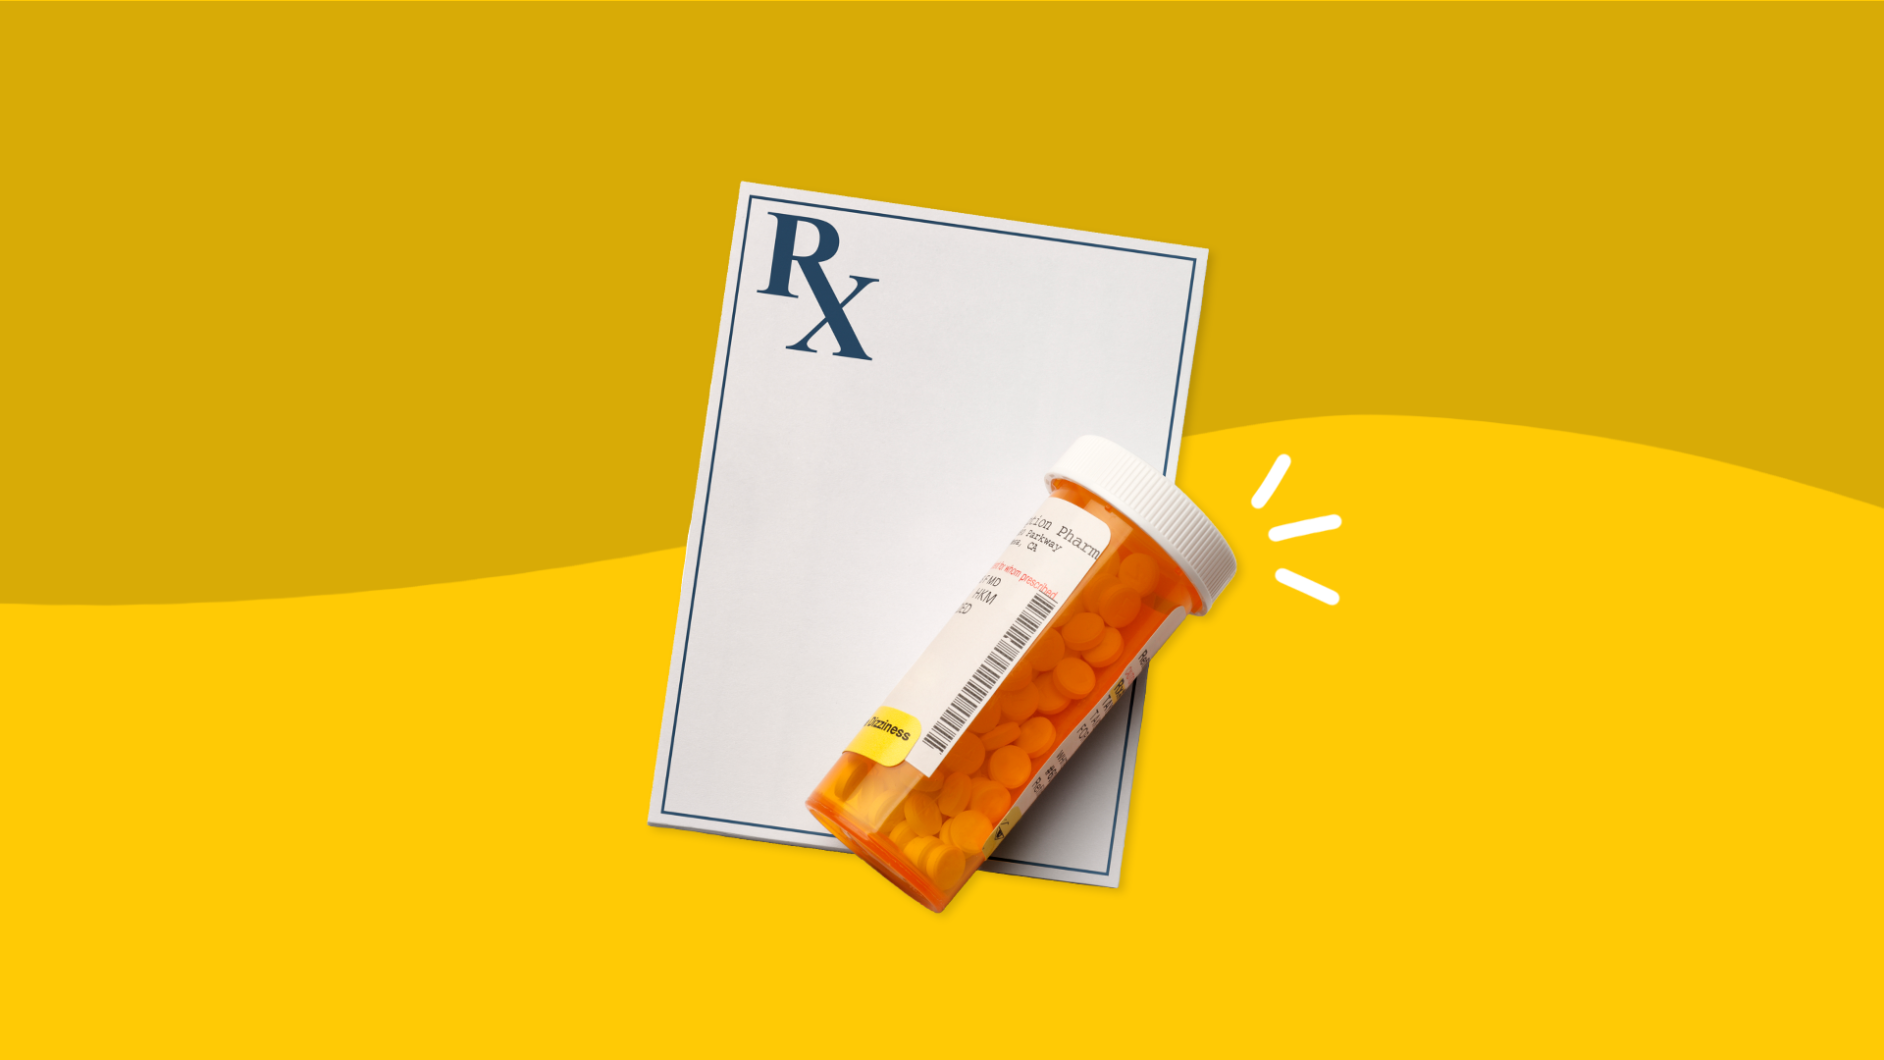 Prescription pad with pill bottle: Common and serious nitrofurantoin side effects